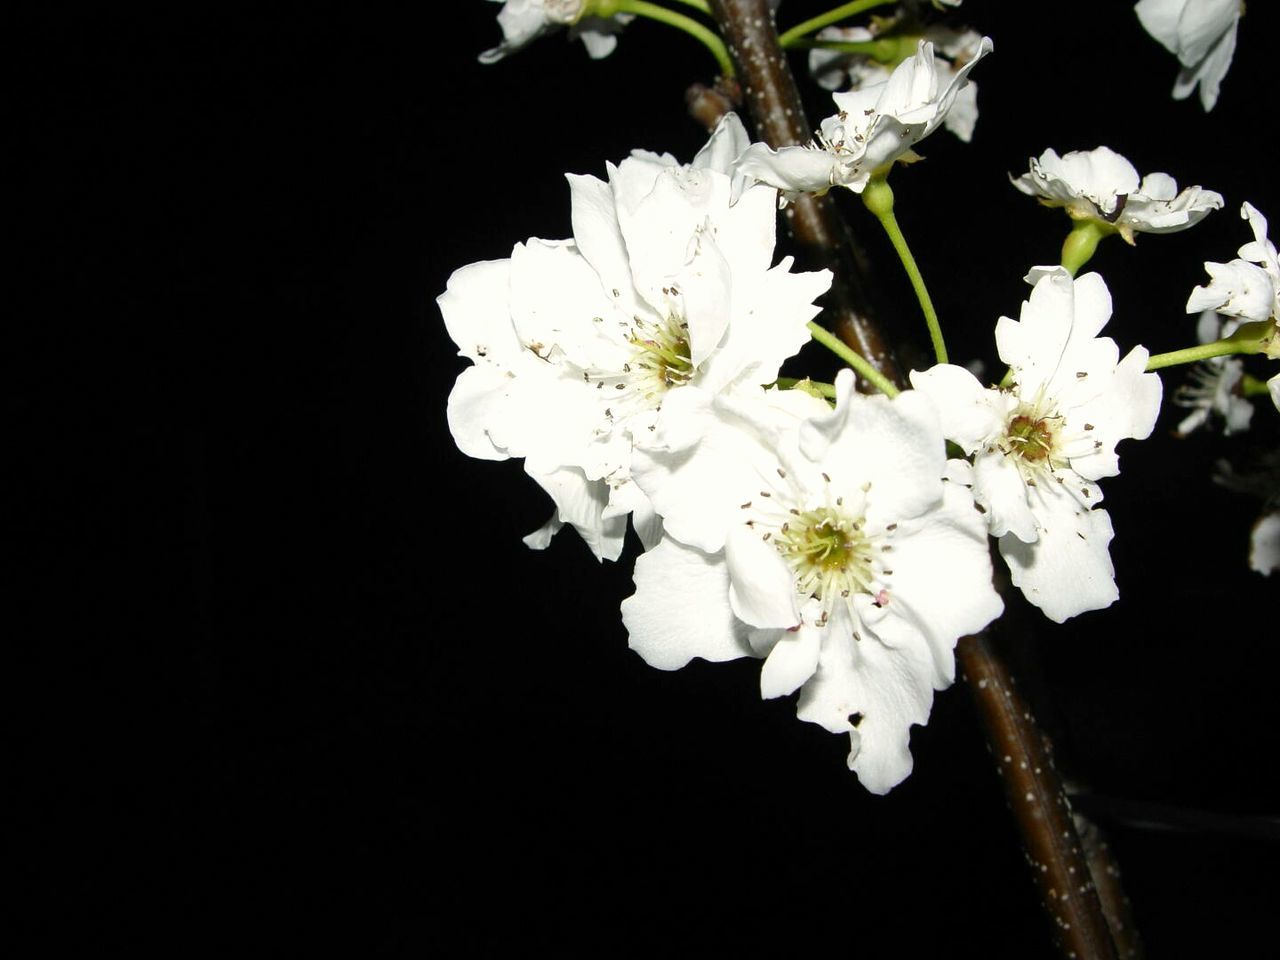 CLOSE-UP OF WHITE FLOWERS AGAINST BLACK BACKGROUND